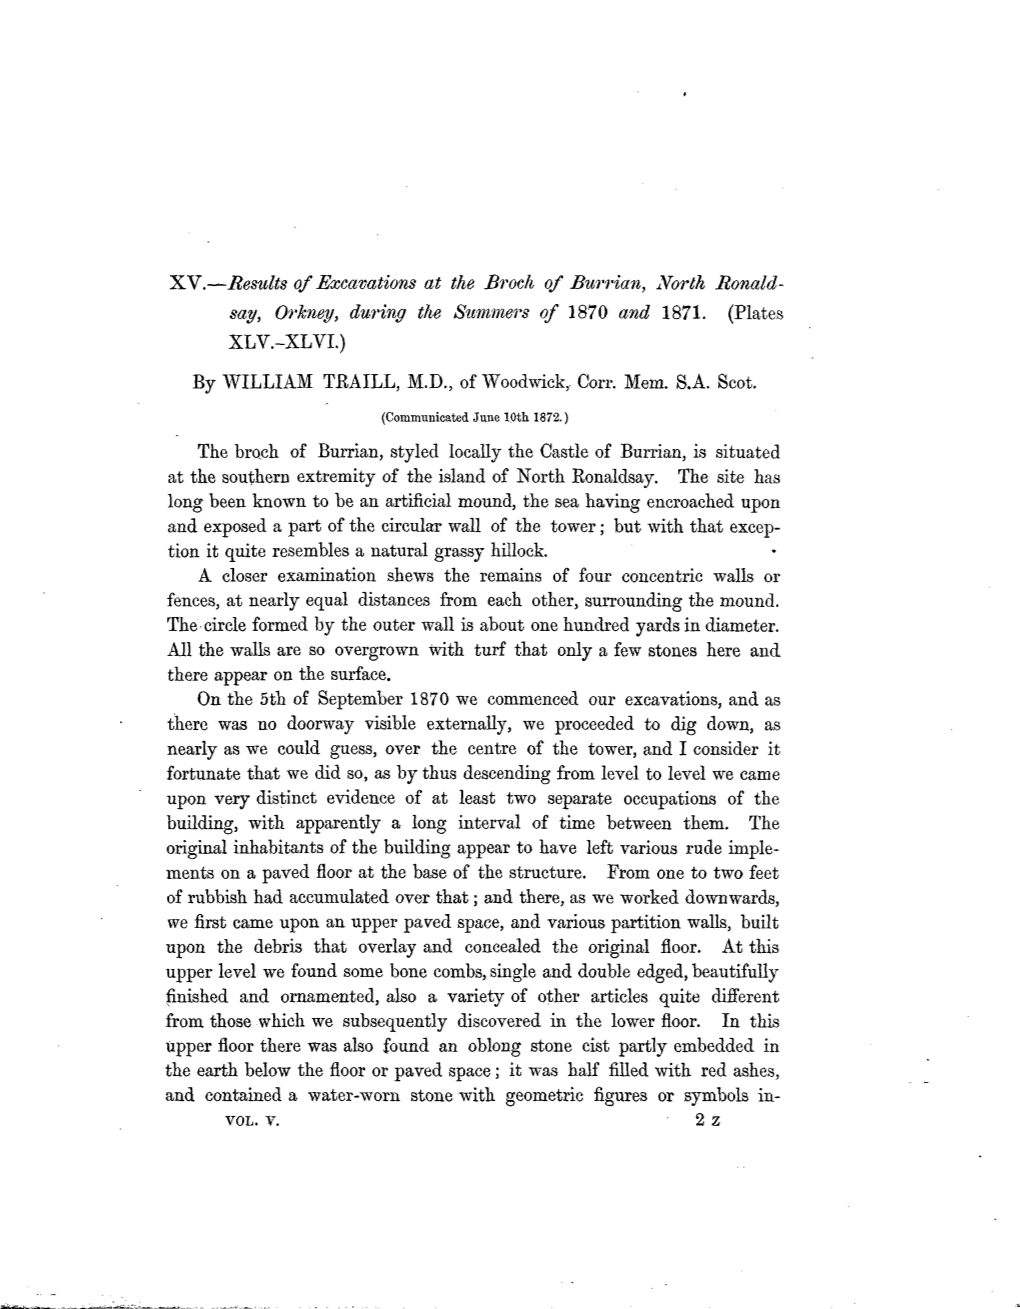 XV.—Results of Excavations at the Broch of Burrian, North Ronald- Say, Orkney, During the Summers of 1870 and 1871